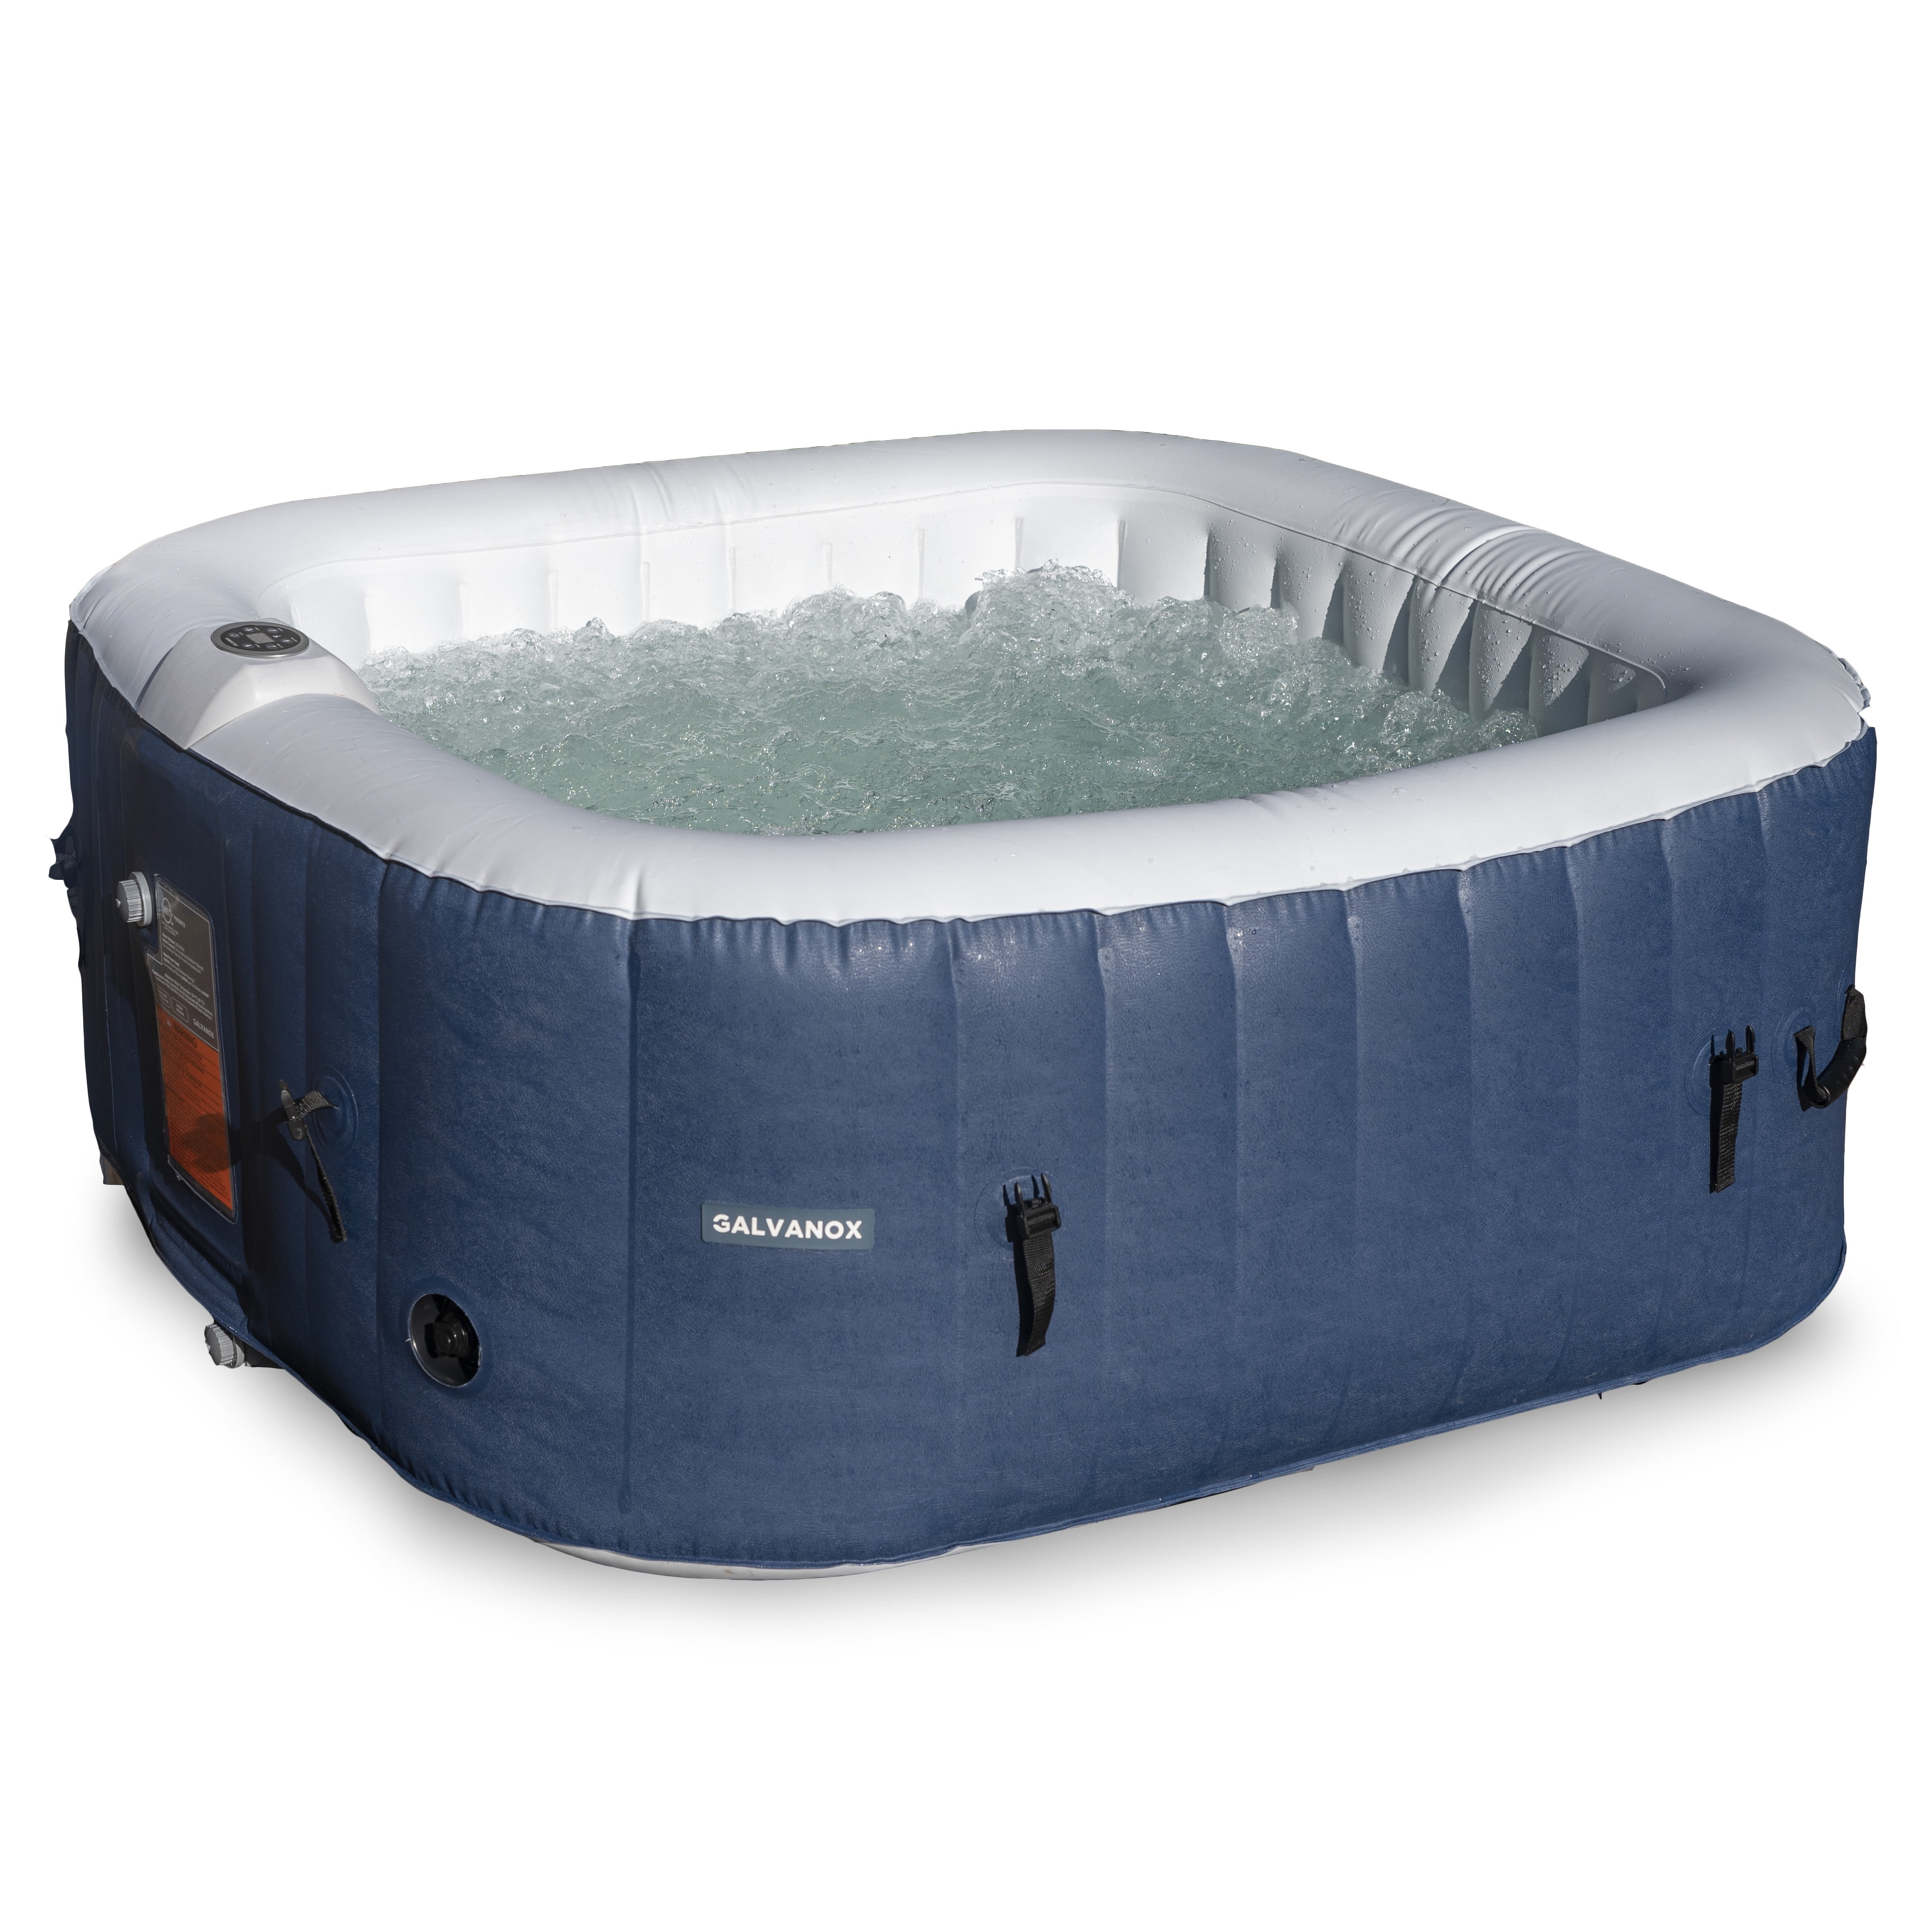 Inflatable Hot Tub, 2-4 Person Blow Up Portable Spa with Built-in